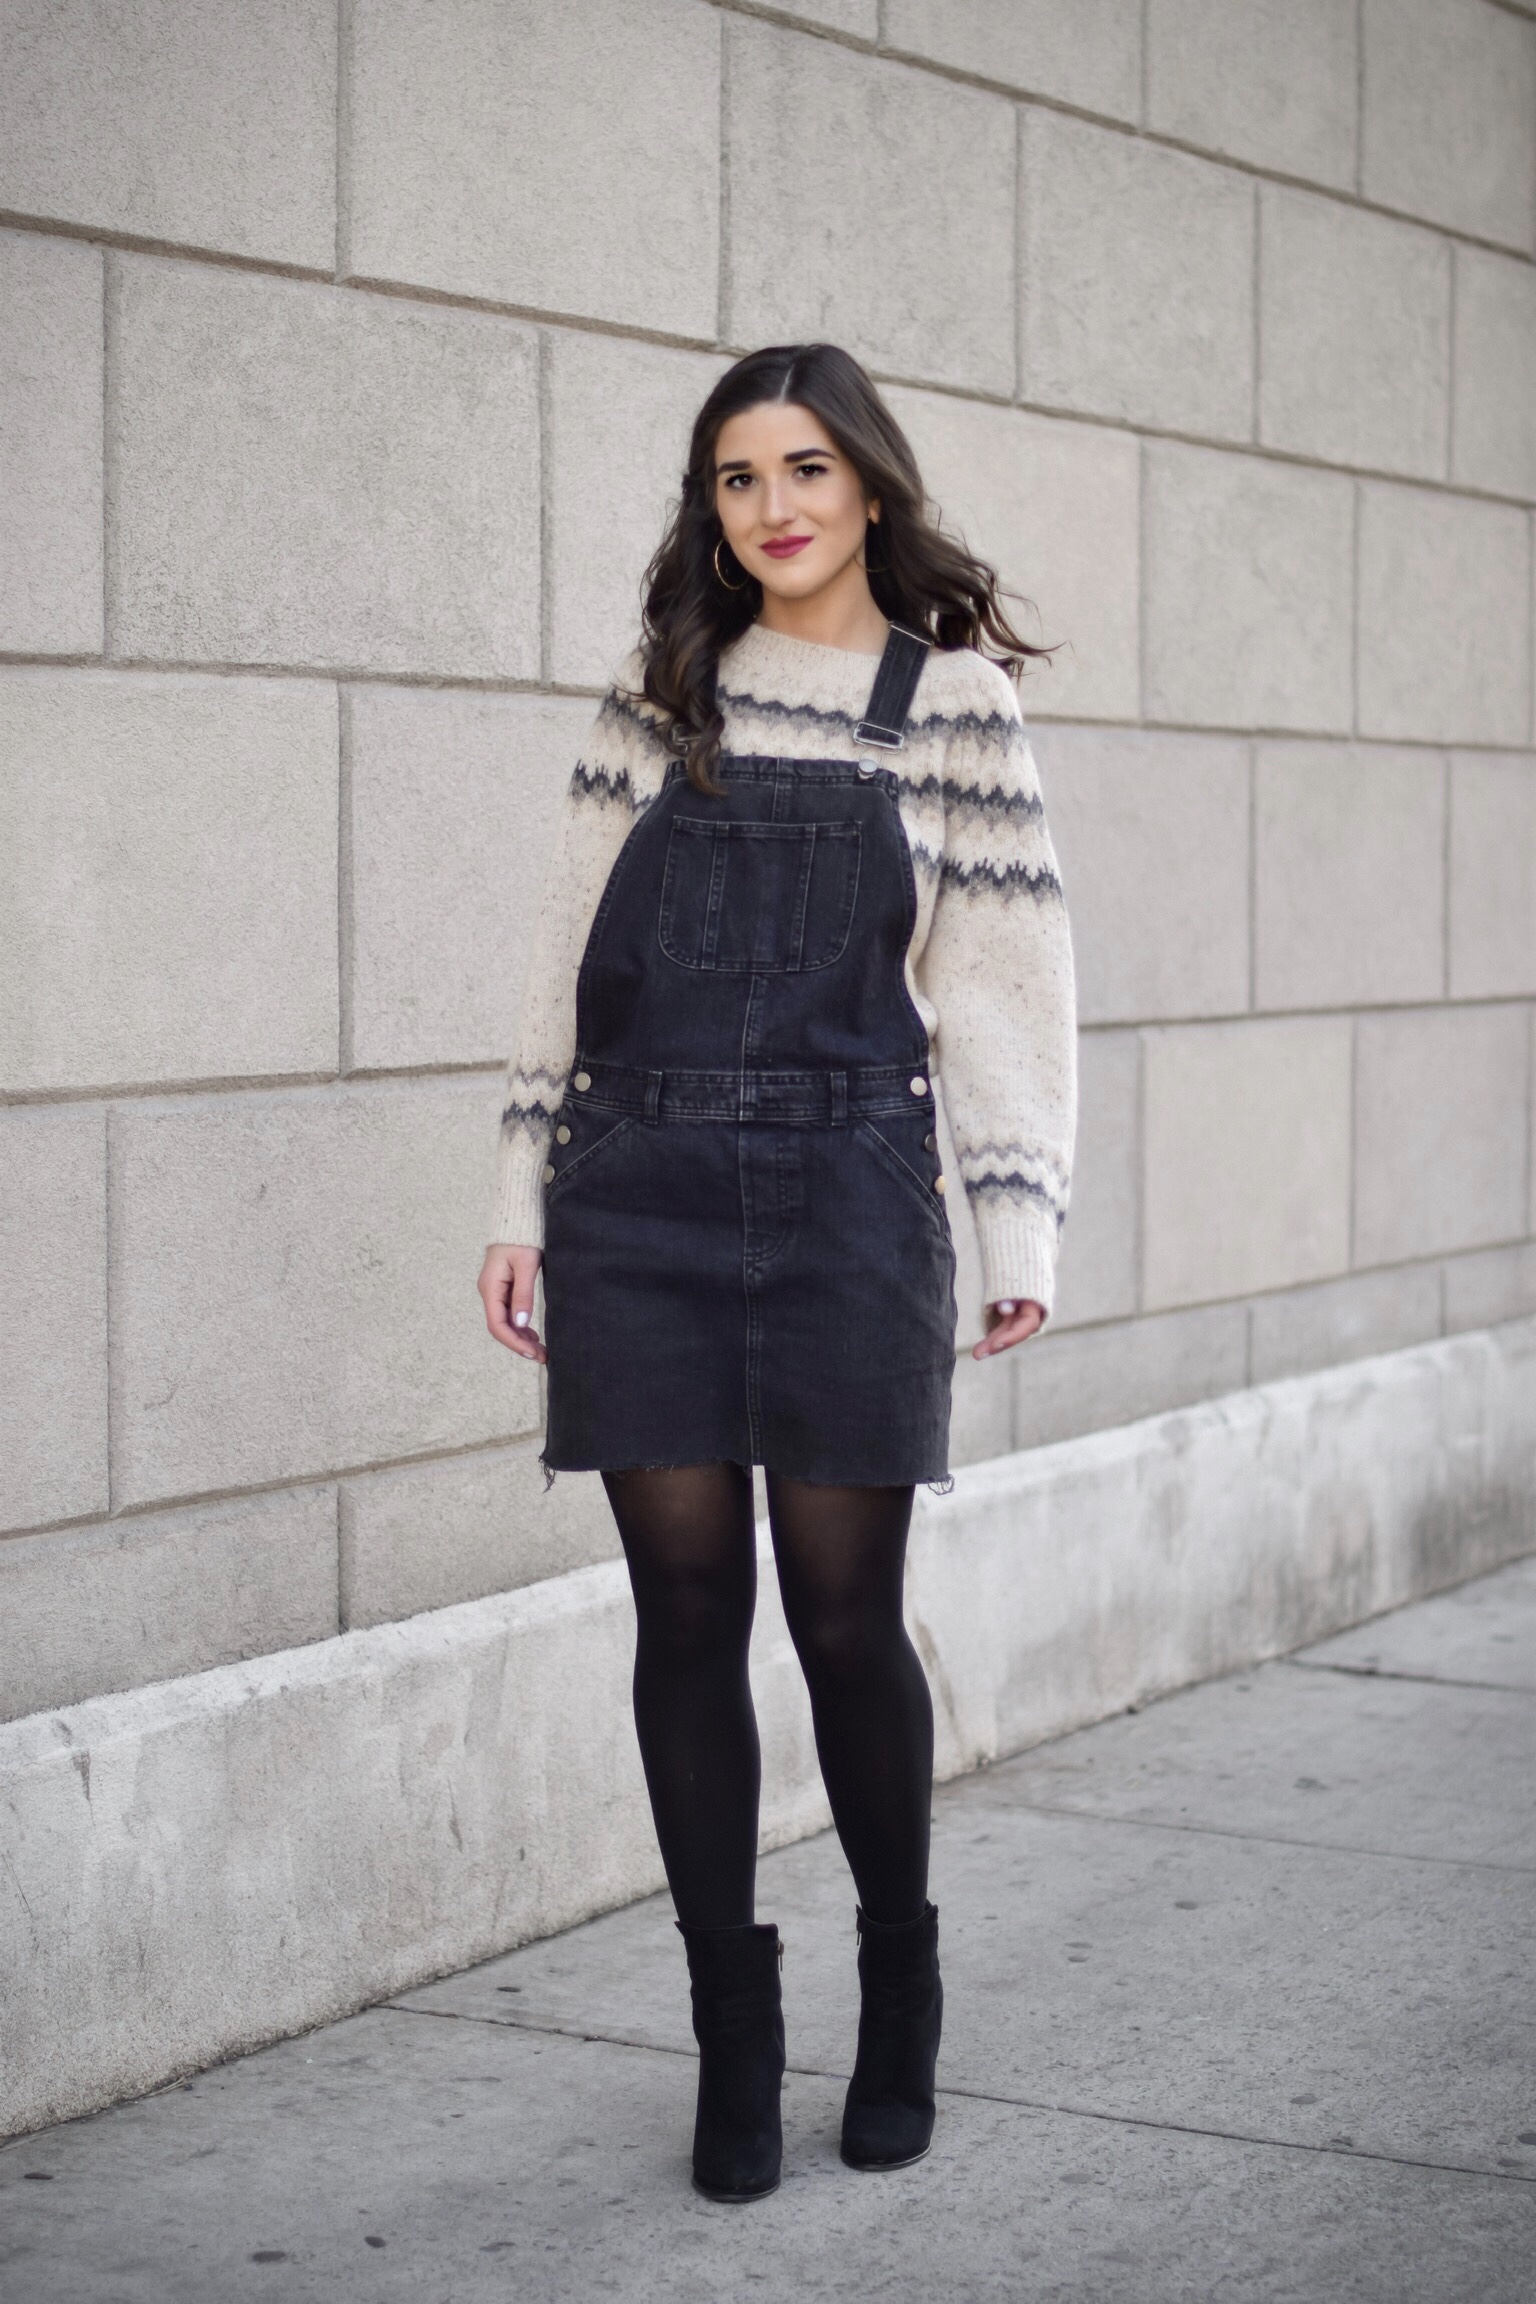 overall dress with tights